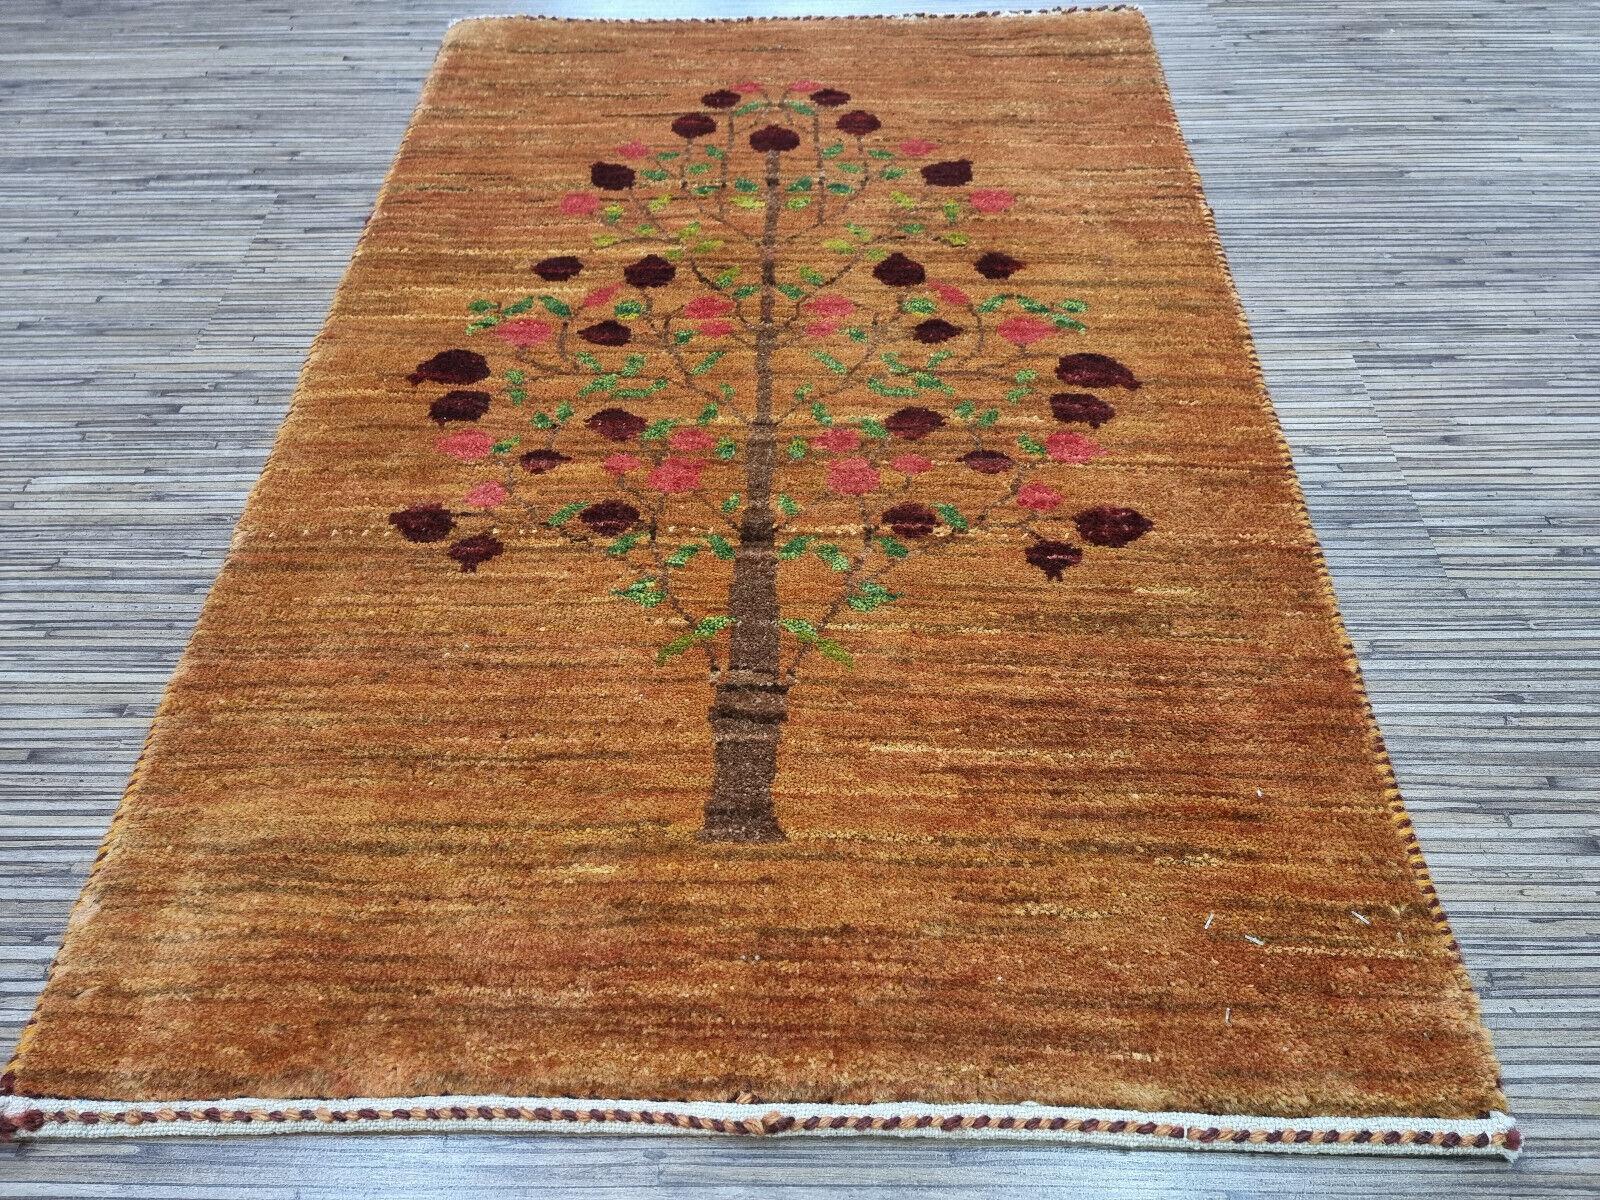 Late 20th Century Handmade Vintage Persian Style Gabbeh Rug 1.9' x 2.9', 1980s - 1D116 For Sale